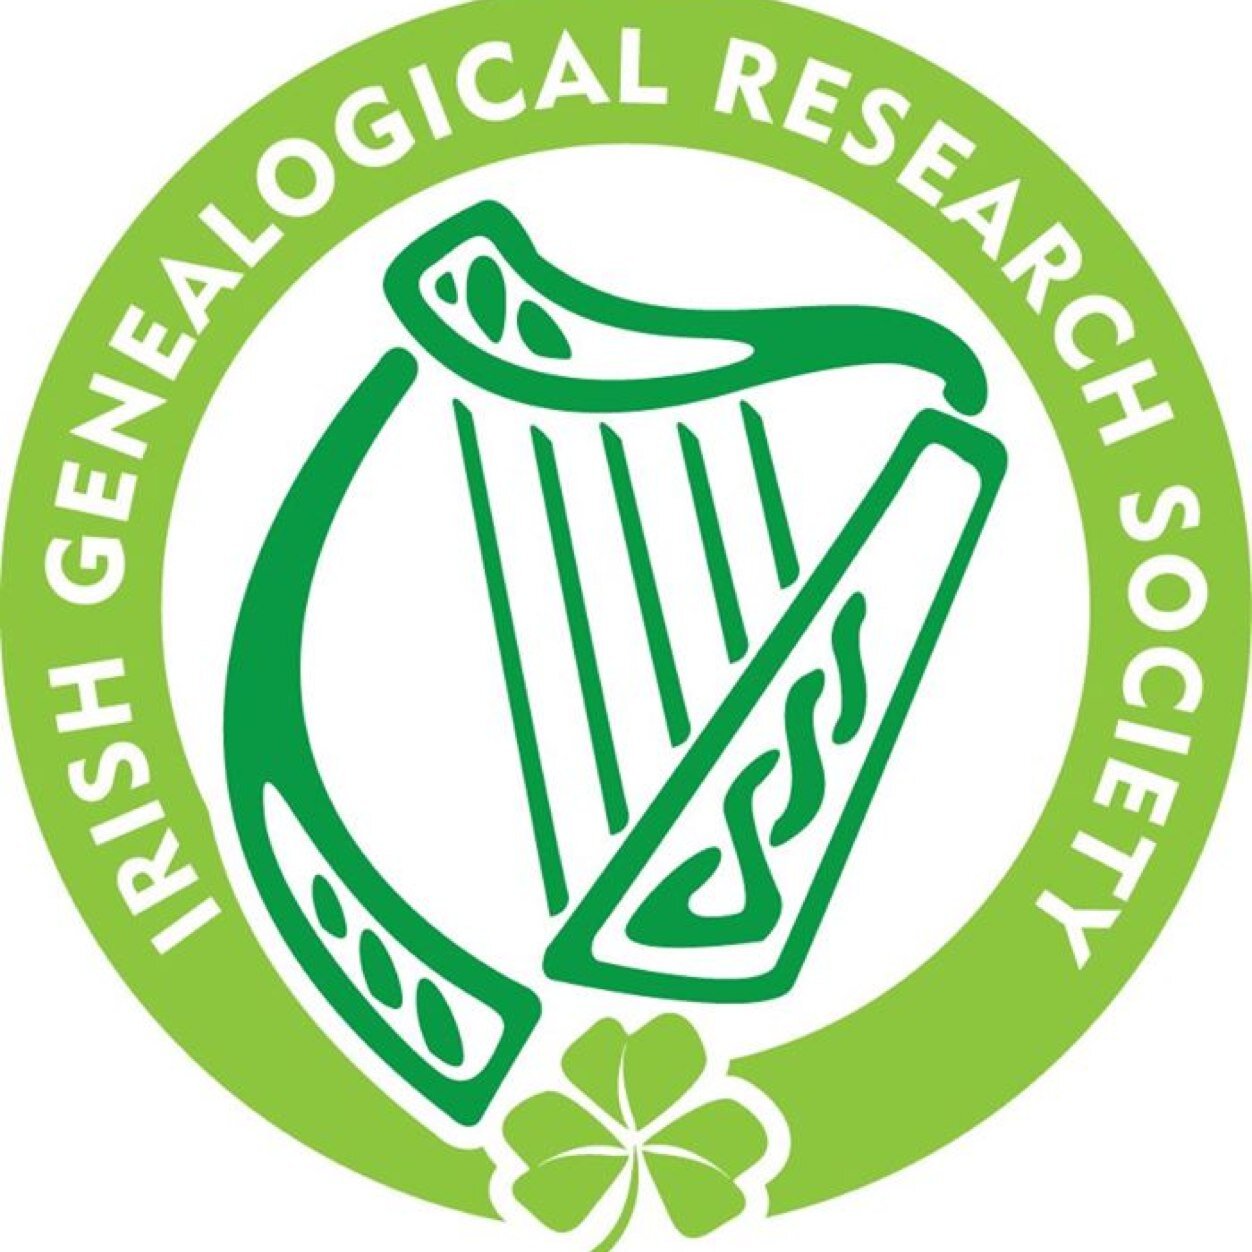 Irish Genealogical Research Society: “Great Granddaddy of all Irish Family History Societies” - founded in 1936.